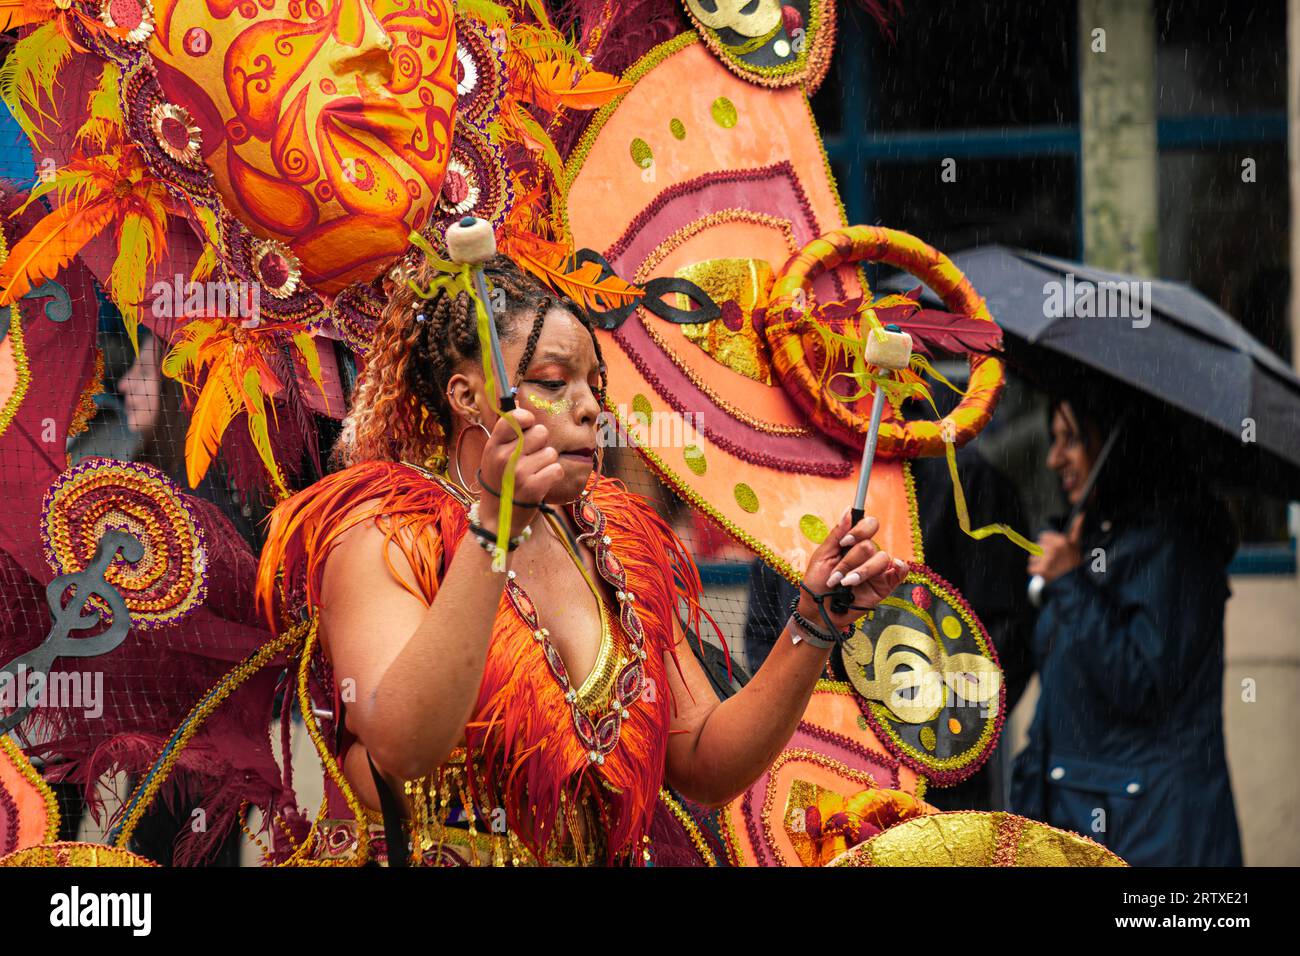 Caribbean Carnival Lady Dancer in colourful costume Stock Photo